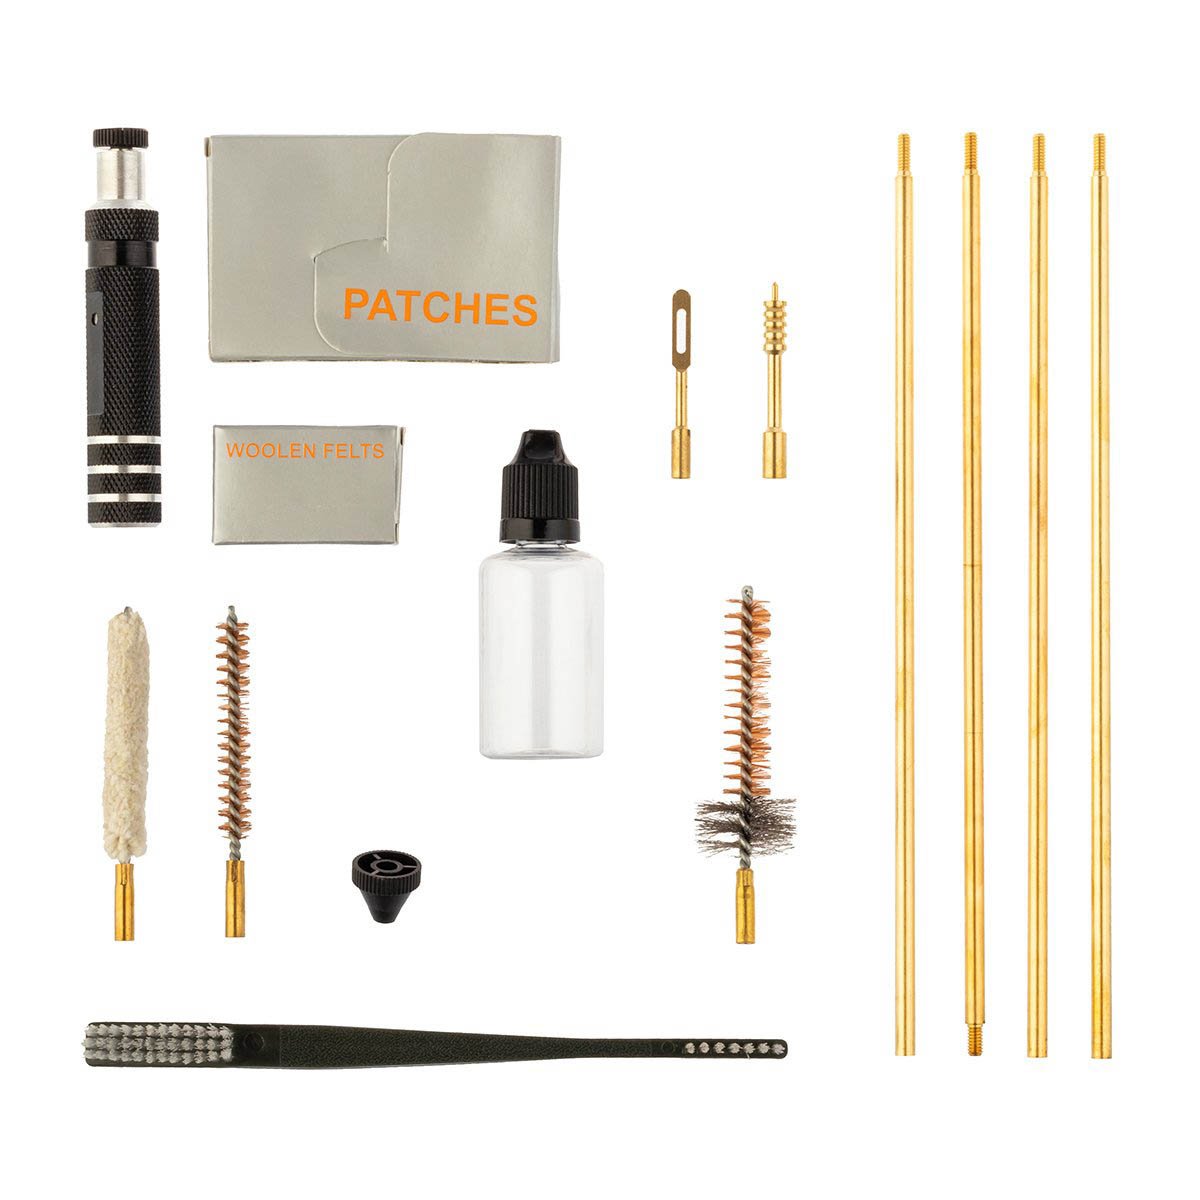 The Kit includes 2 bronze and 1 cotton gun swabs, a folded gunstick with a handle, patches, woolen felts, a brazen fire swab, a cone director, a capron brush and an oil container.